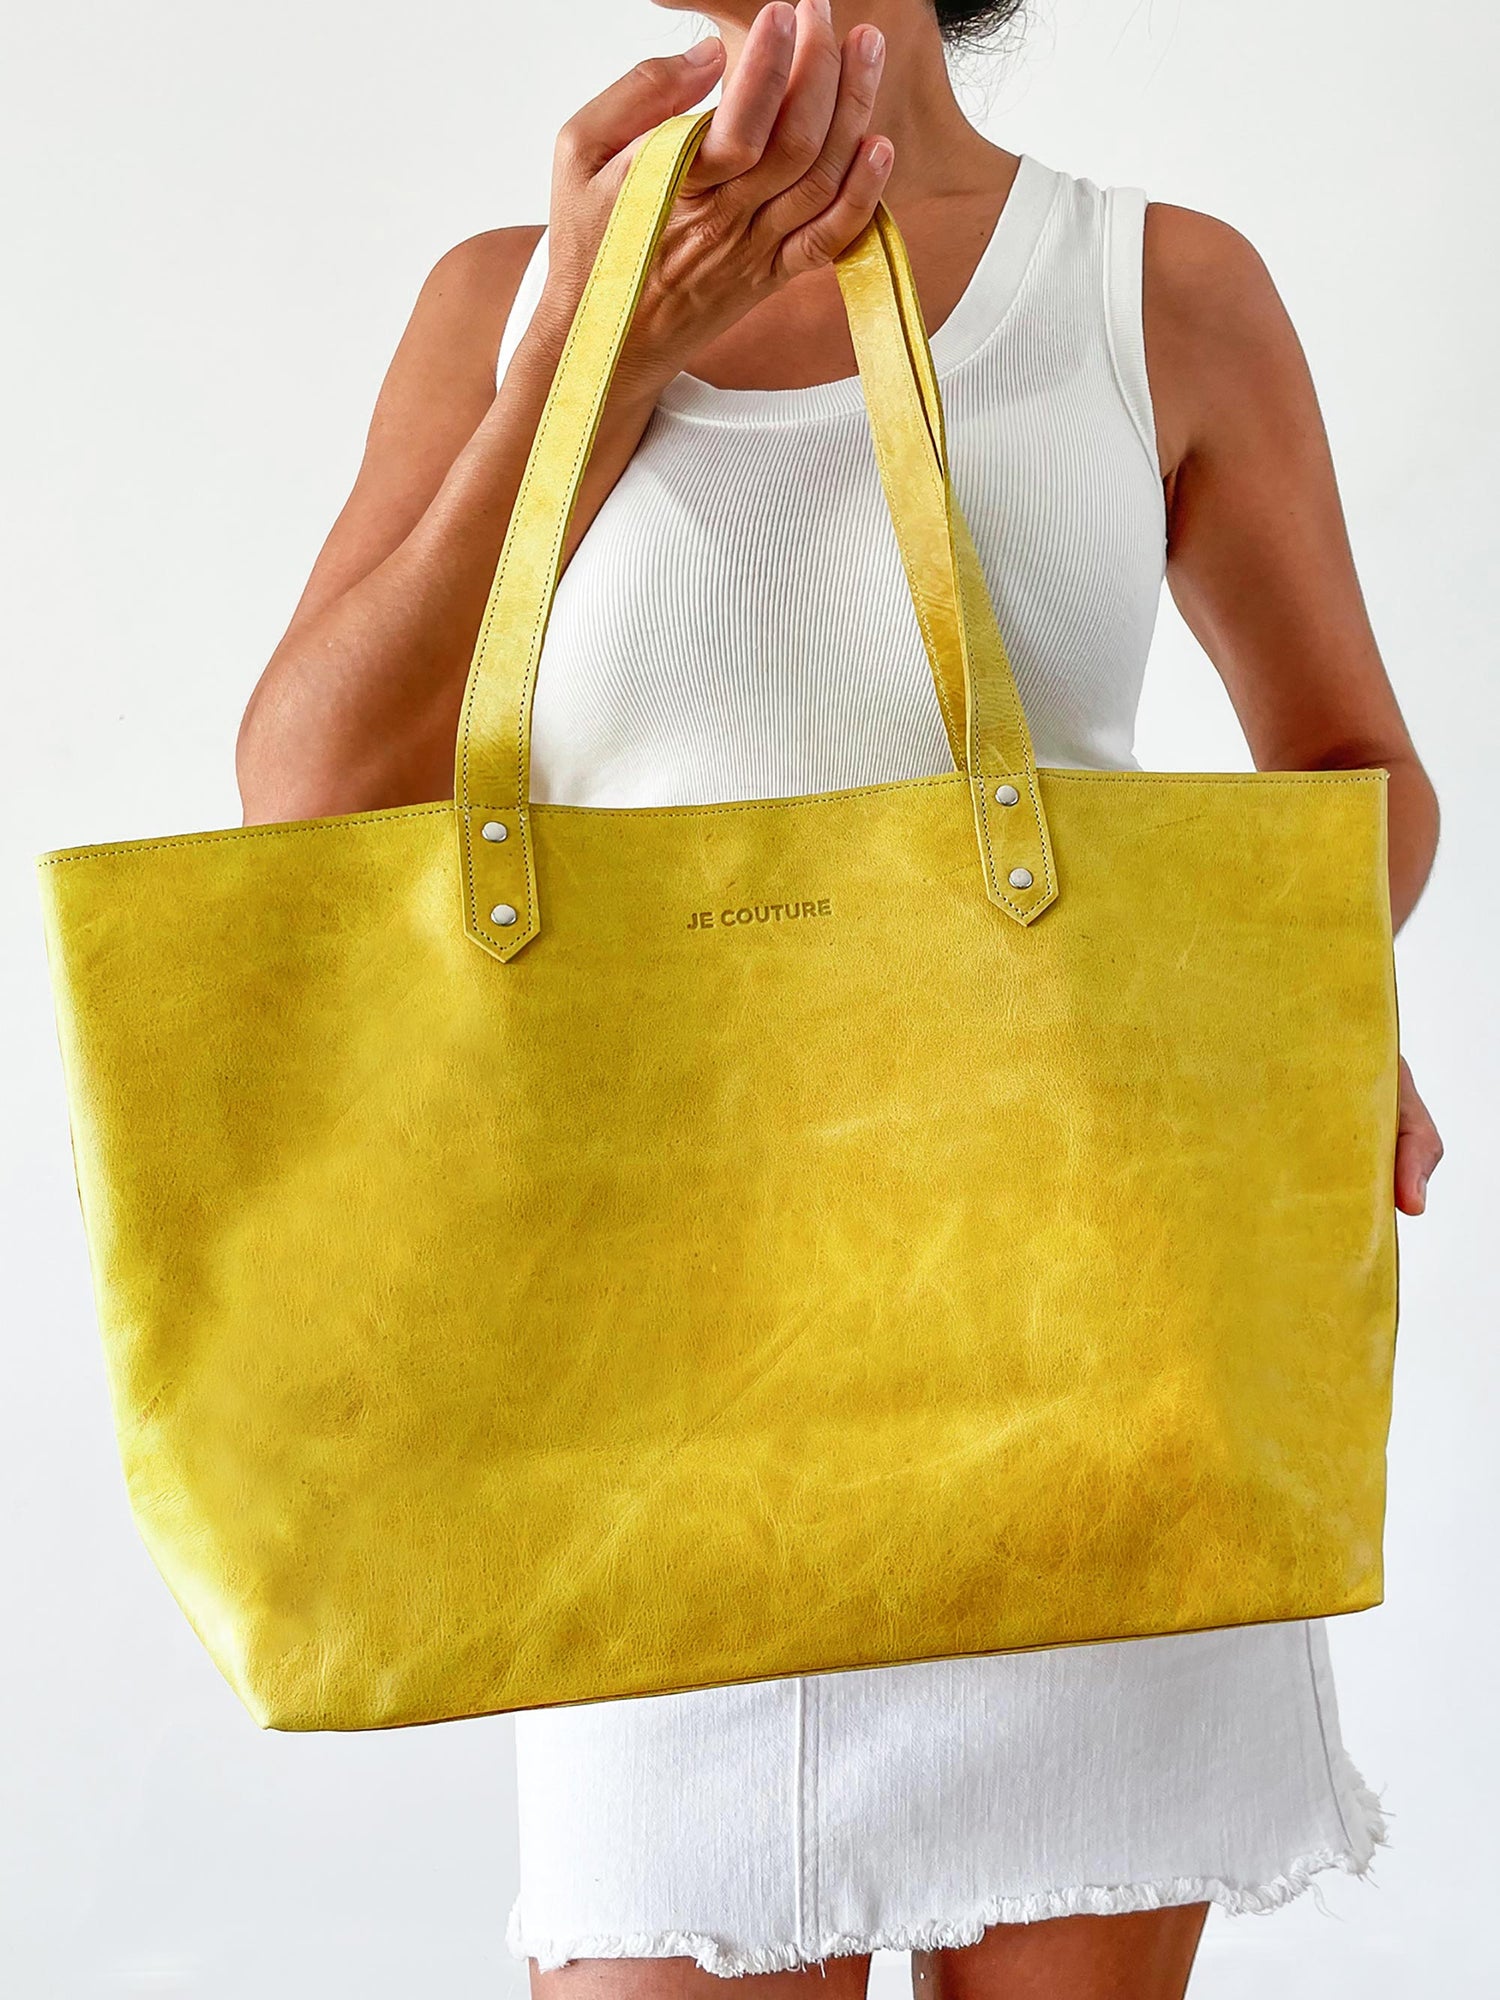 Je Couture - Tote Bag Yellow | Lifestyle